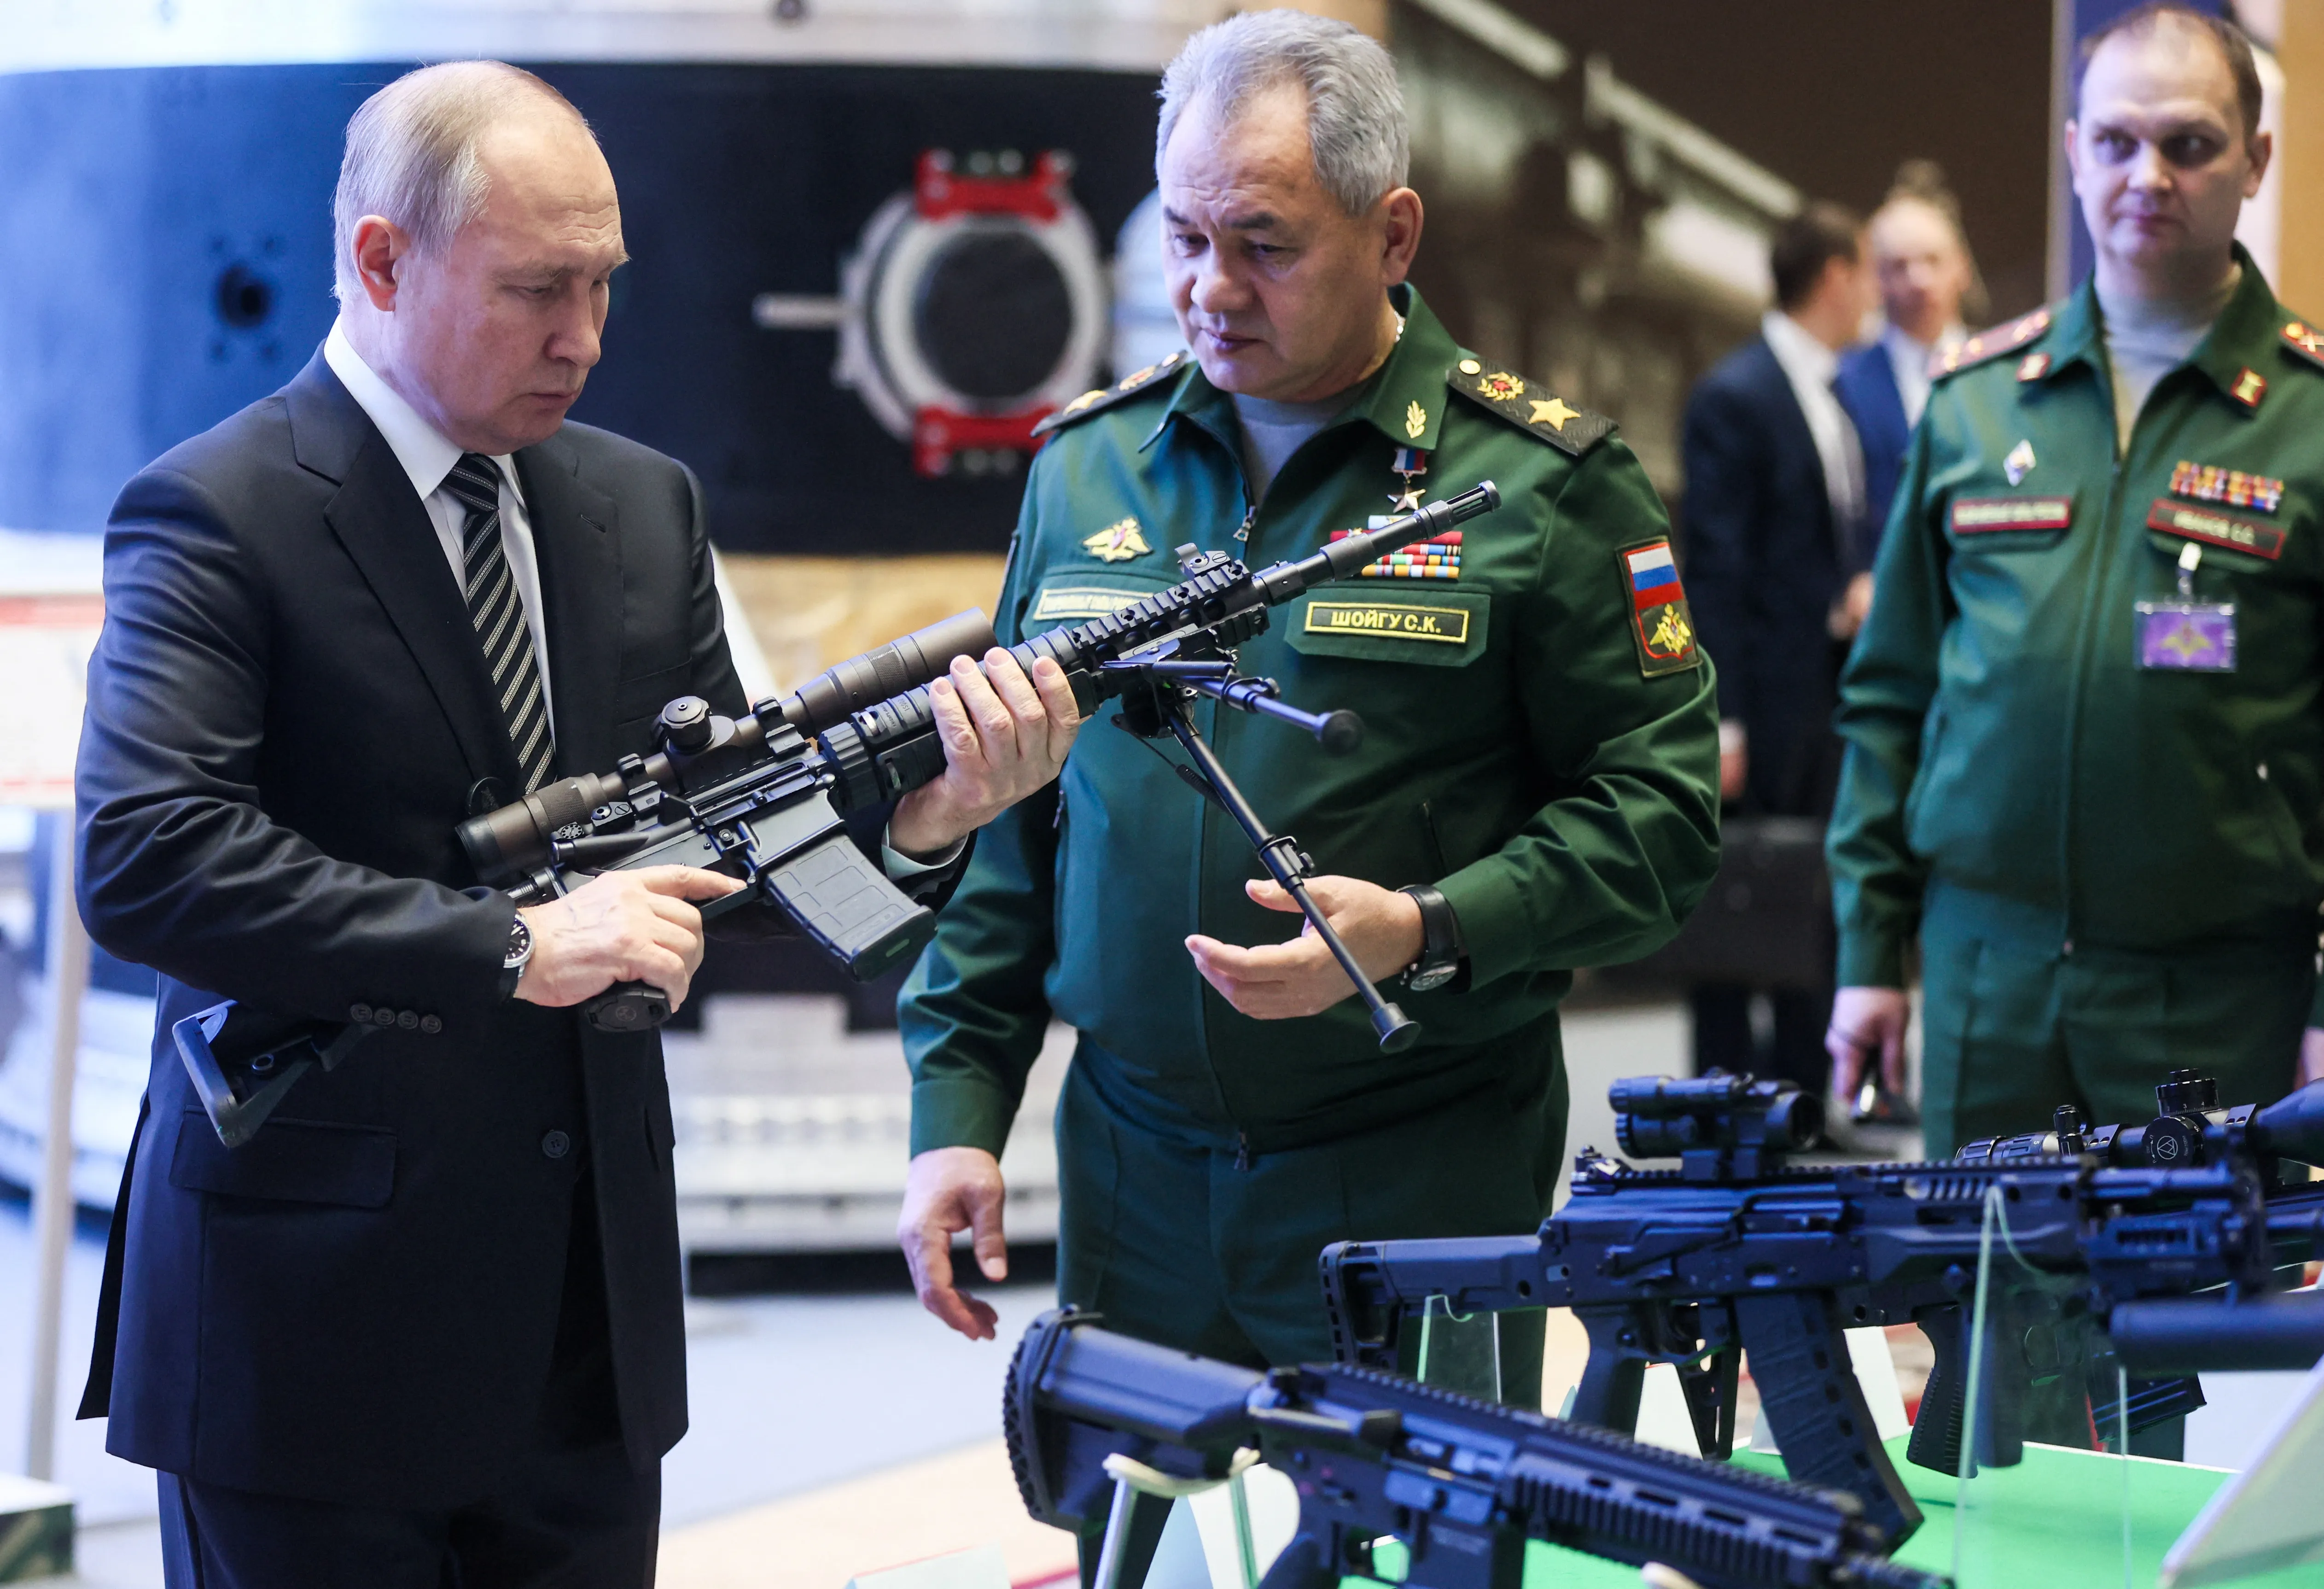 Putin Affirms Russia is Ready to Wage War Against NATO at Any Time